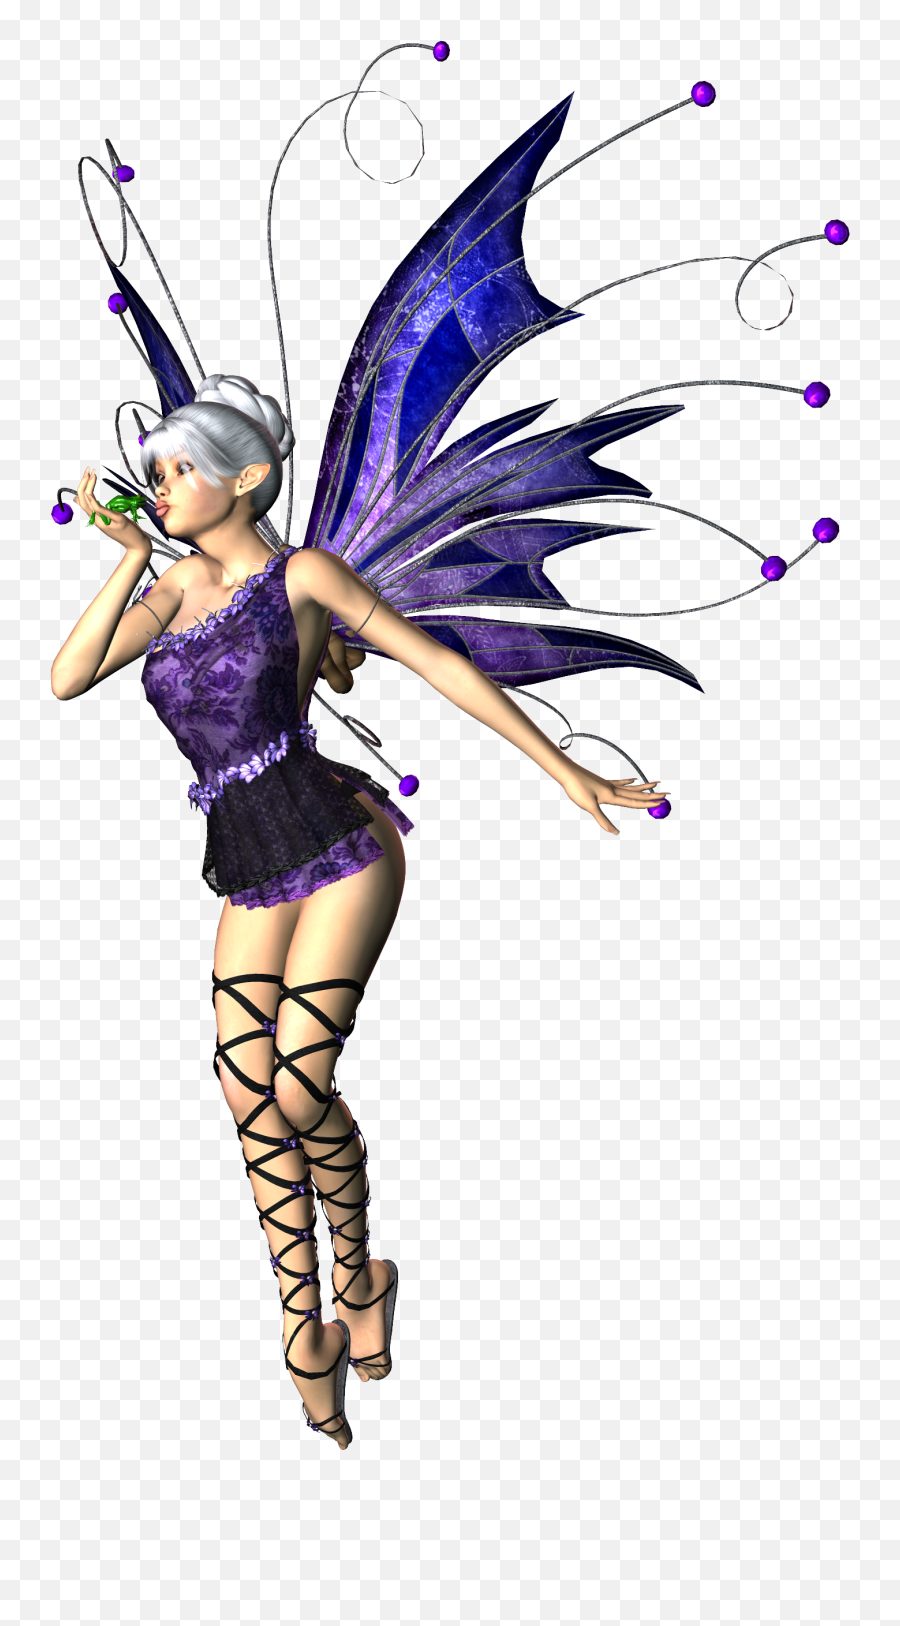 Girl With Purple Wings Fairy 3d Render Clipart At White Emoji,Fairy Cartoon Emotions